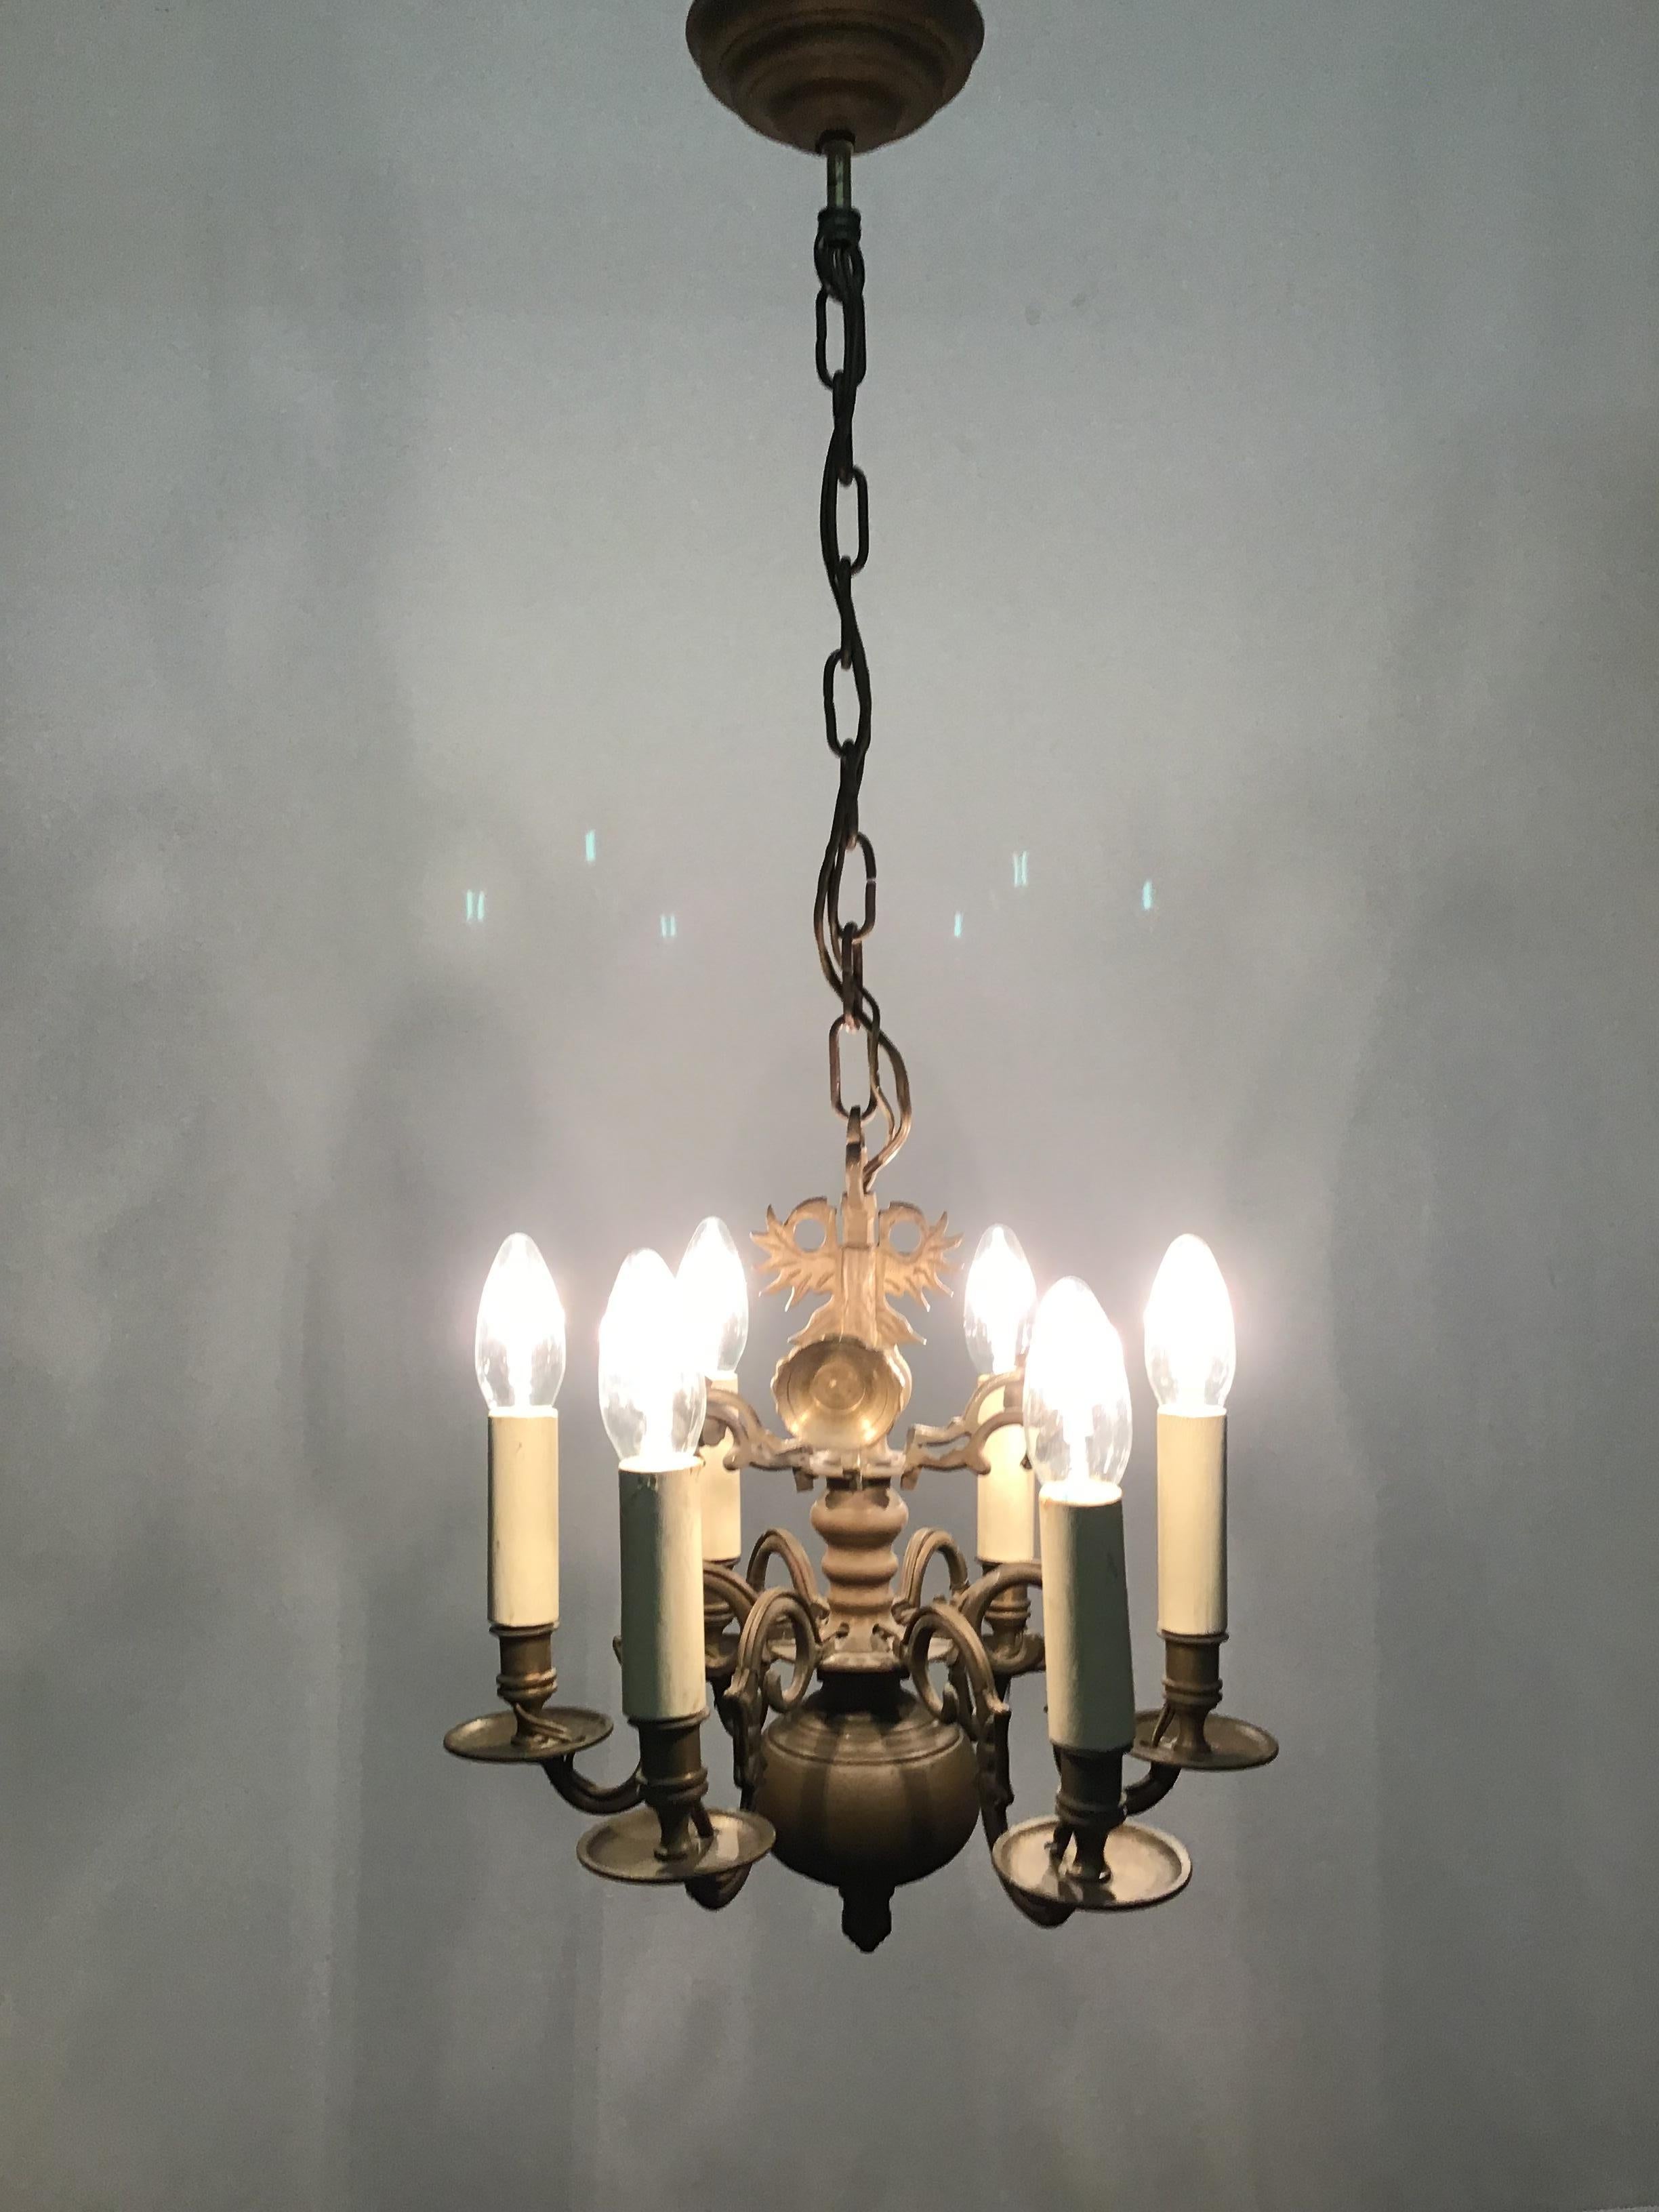 Small Dutch solid bronze chandelier made late in the 19th century and recently wired for electricity.
Solid brass six-light frame with wonderful old patina.
Rewired for US and in an excellent original condition.
Socket: Six E14 (for standard